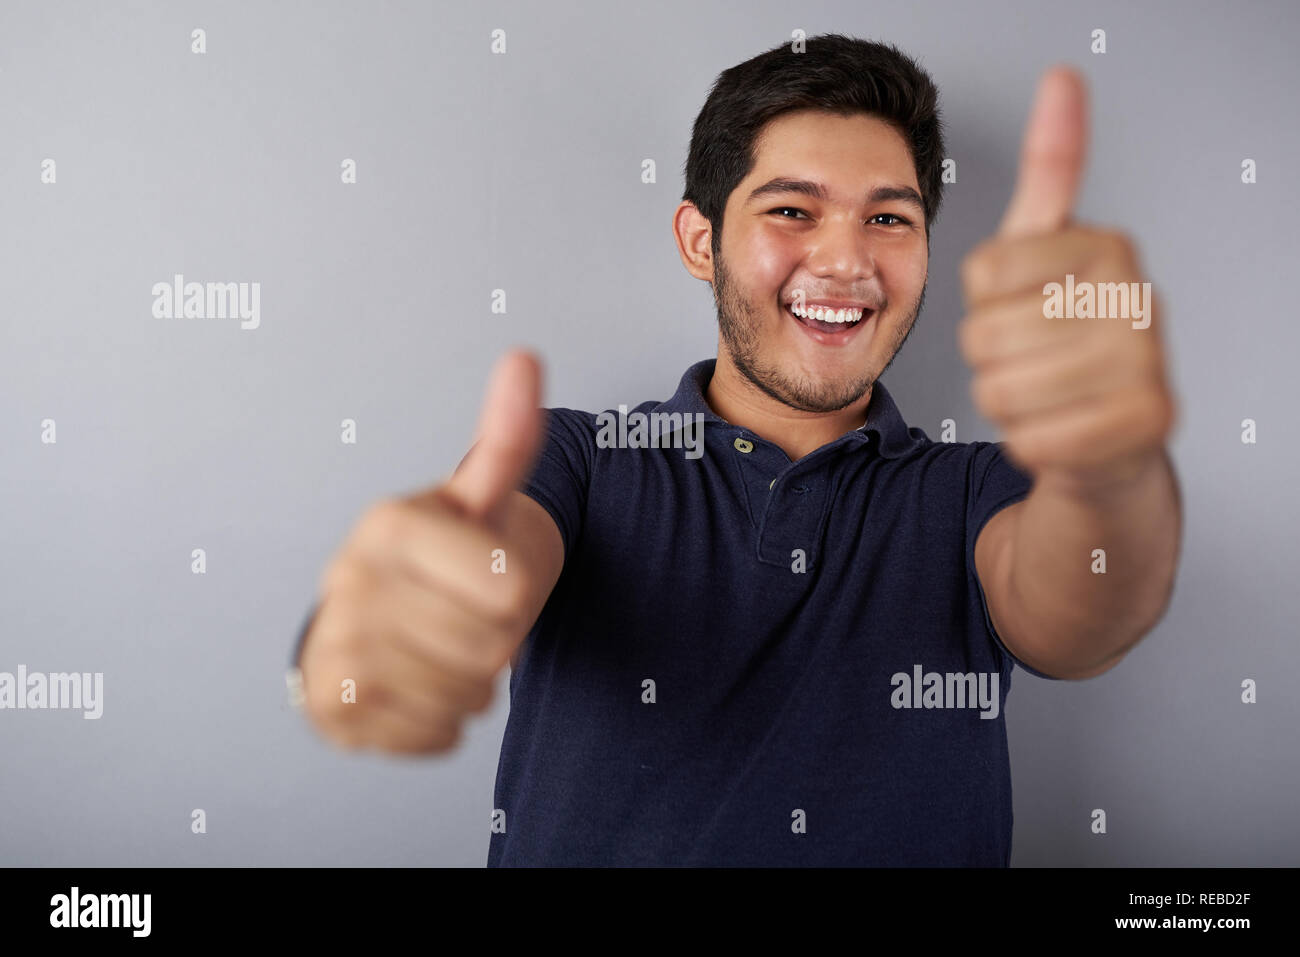 Happy smiling young man showing thumb up isolated on gray background Stock Photo